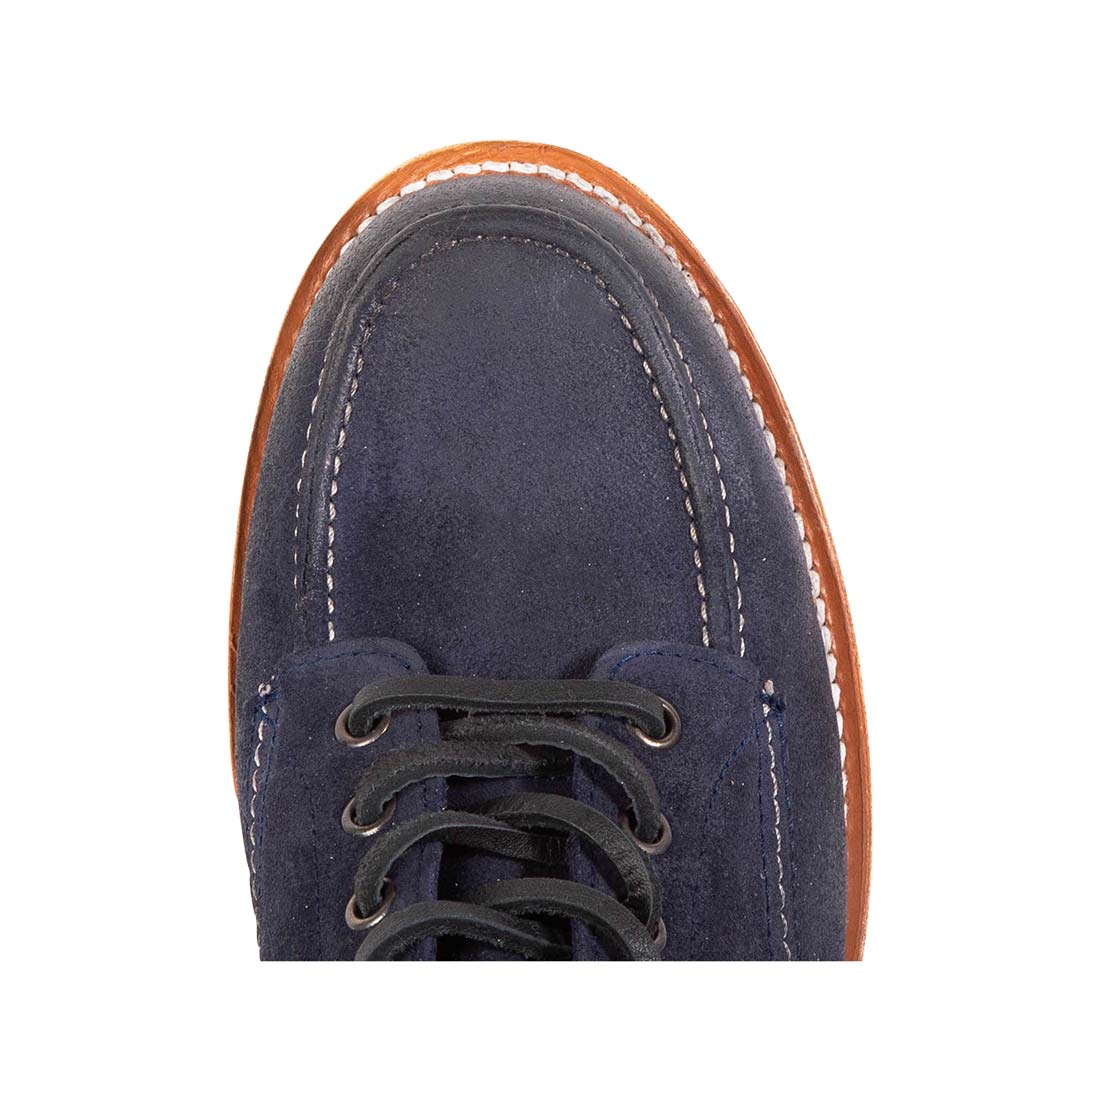 Top view showing round toe and leather lacing on FREEBIRD men's Carbon navy suede shoe